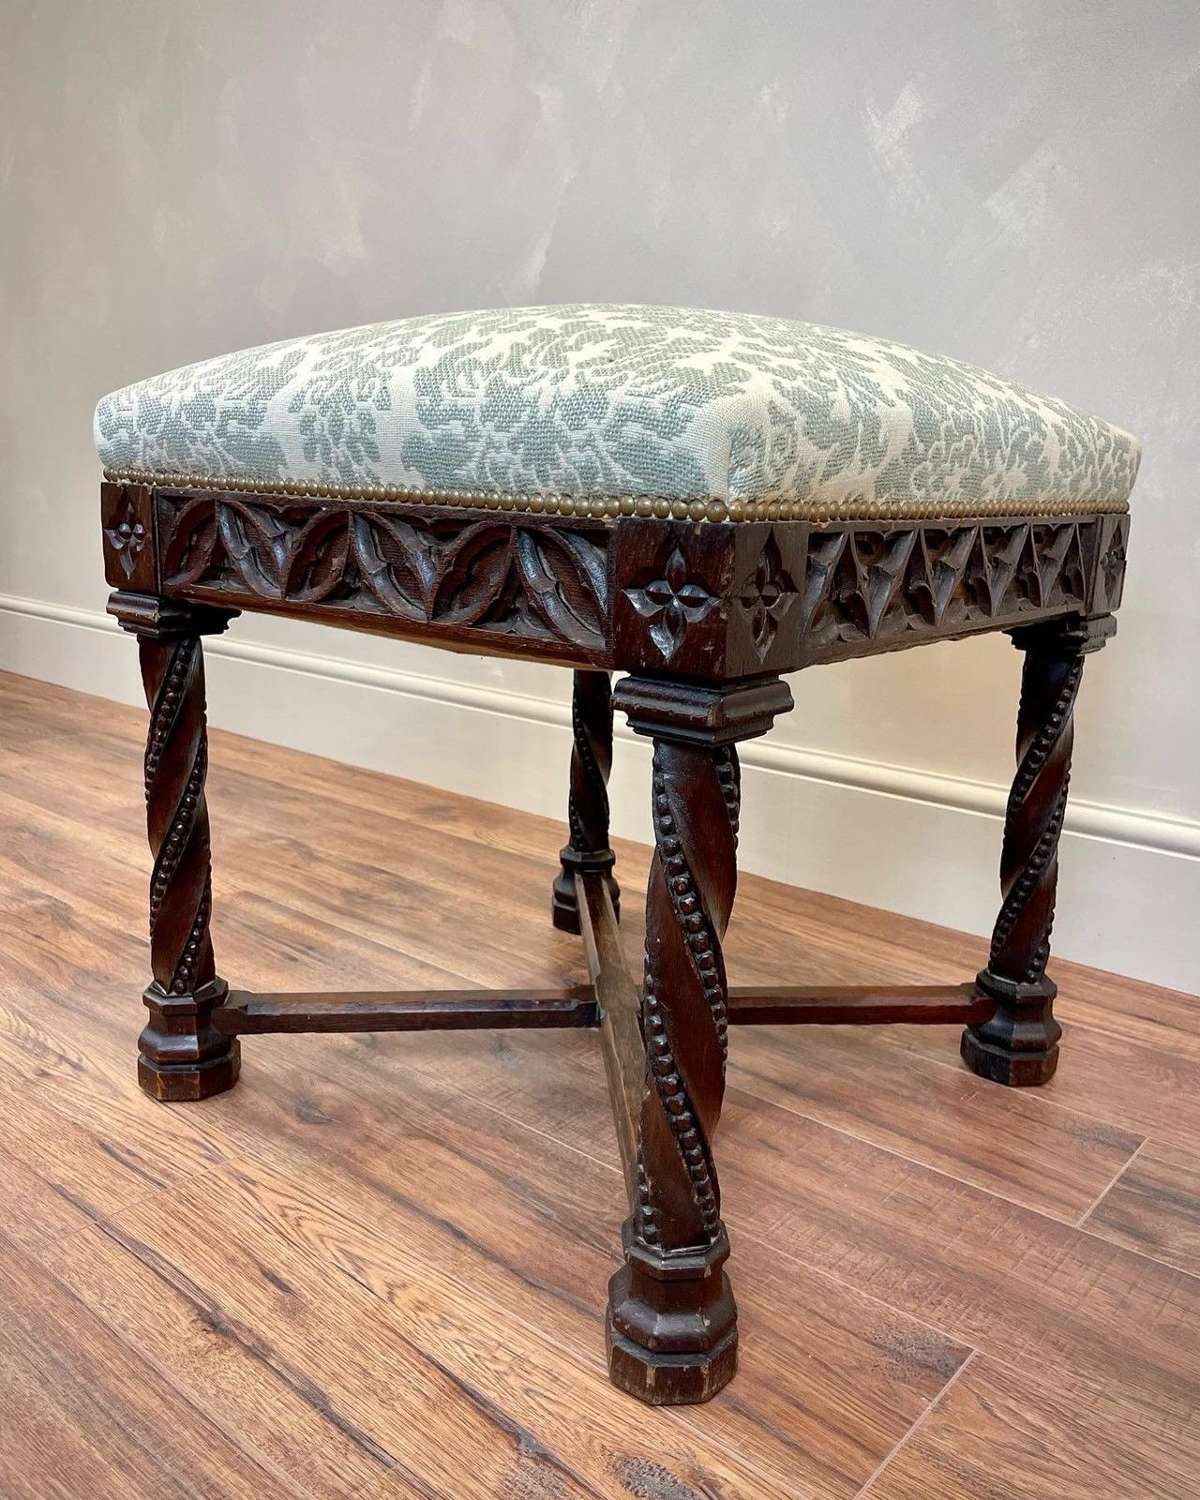 Large, gothic carved stool